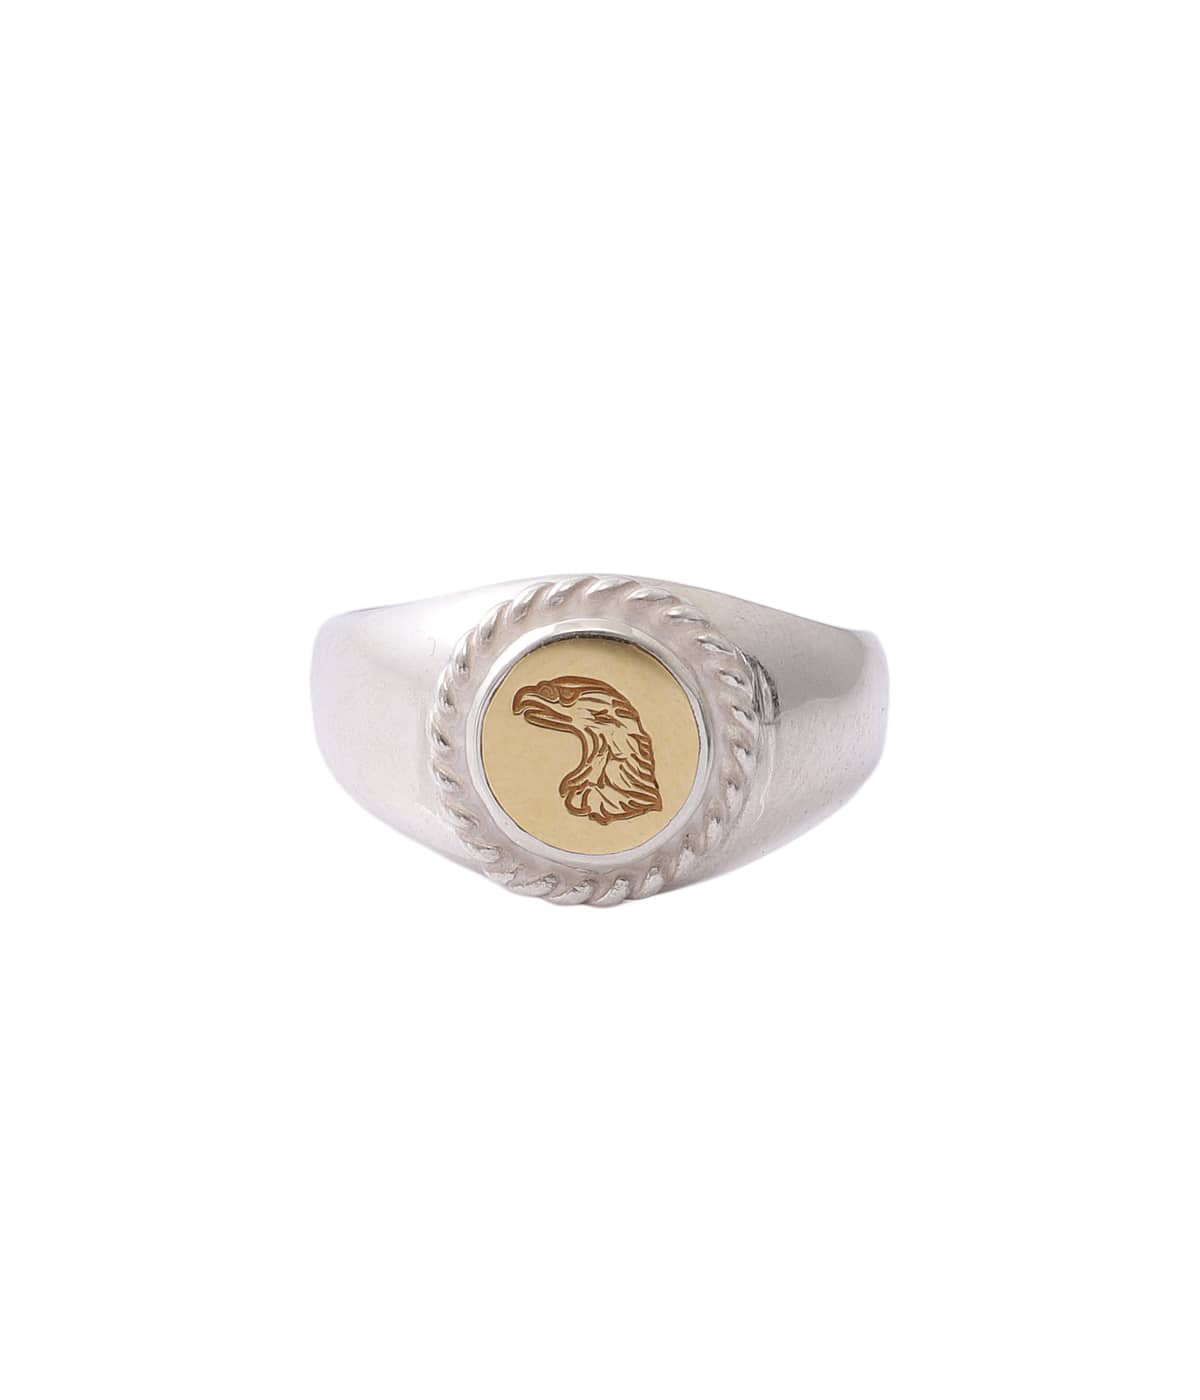 EAGLE HEAD STAMPED RING (18K GOLD ACCENT) No. 36 | LARRY SMITH 